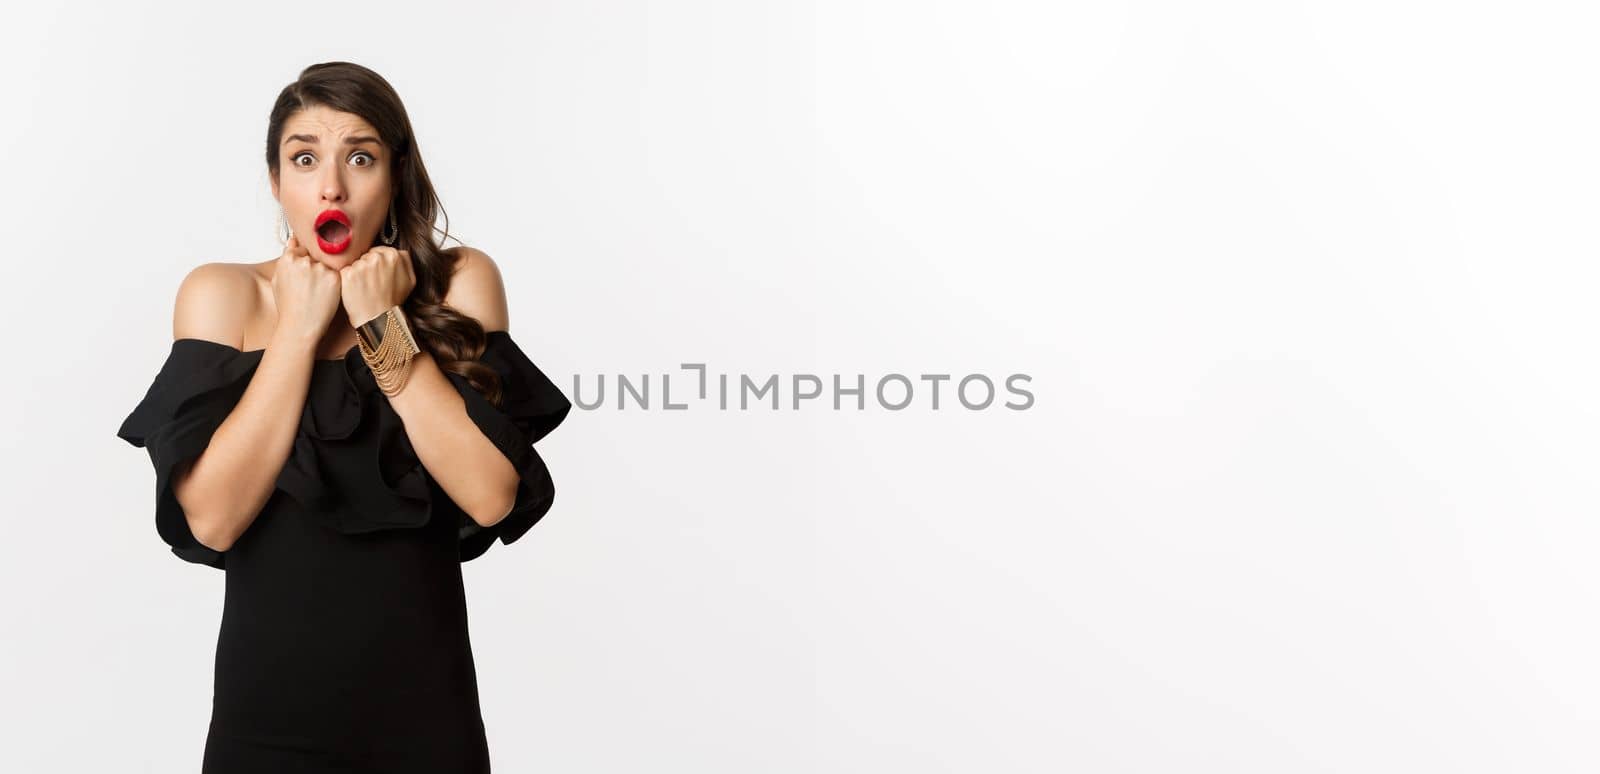 Portrait of glamour woman looking scared and shocked at camera, staring at something with fear, standing in black dress against white background.